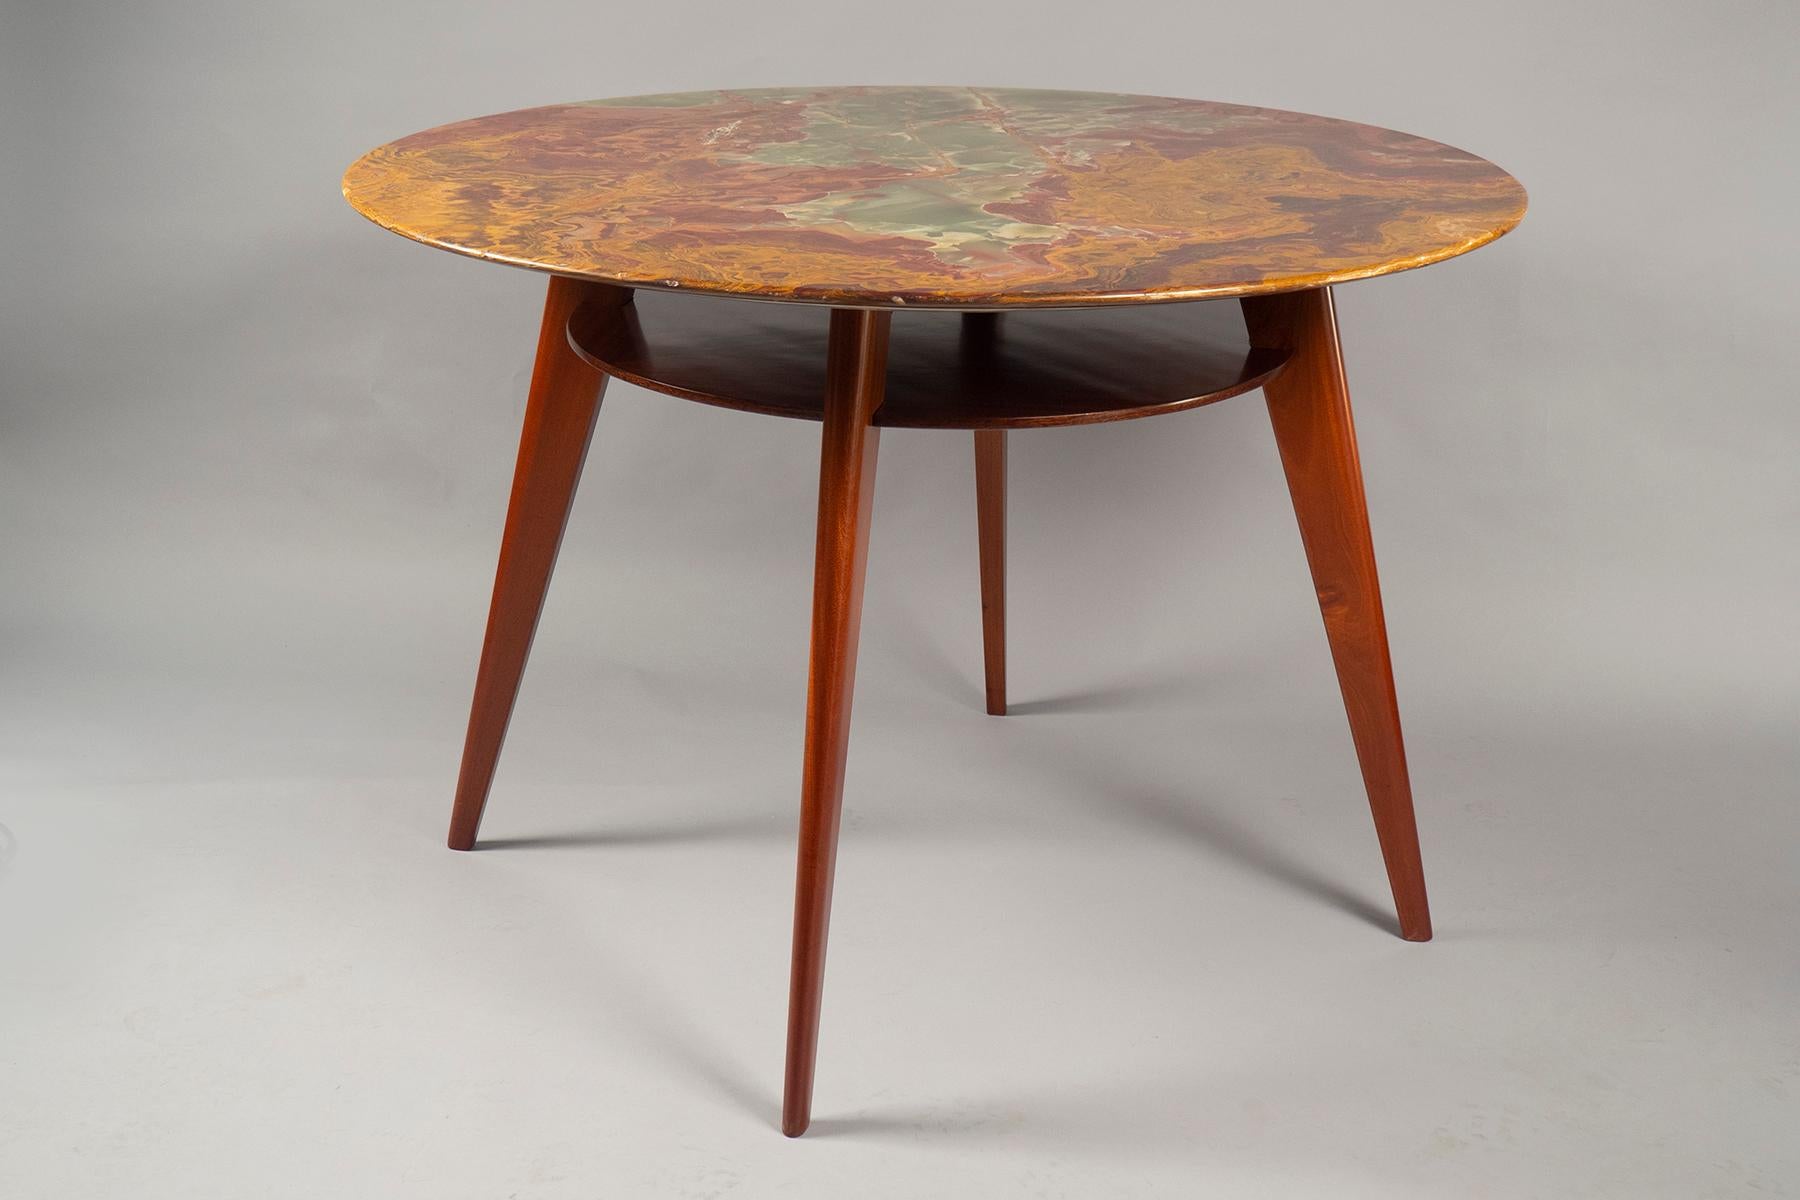 A semi-gloss finished mahogany base with four tapered legs and a round under-the-top shelf (with two brass stretchers), supporting a jade and red/brown mottled Onyx top.